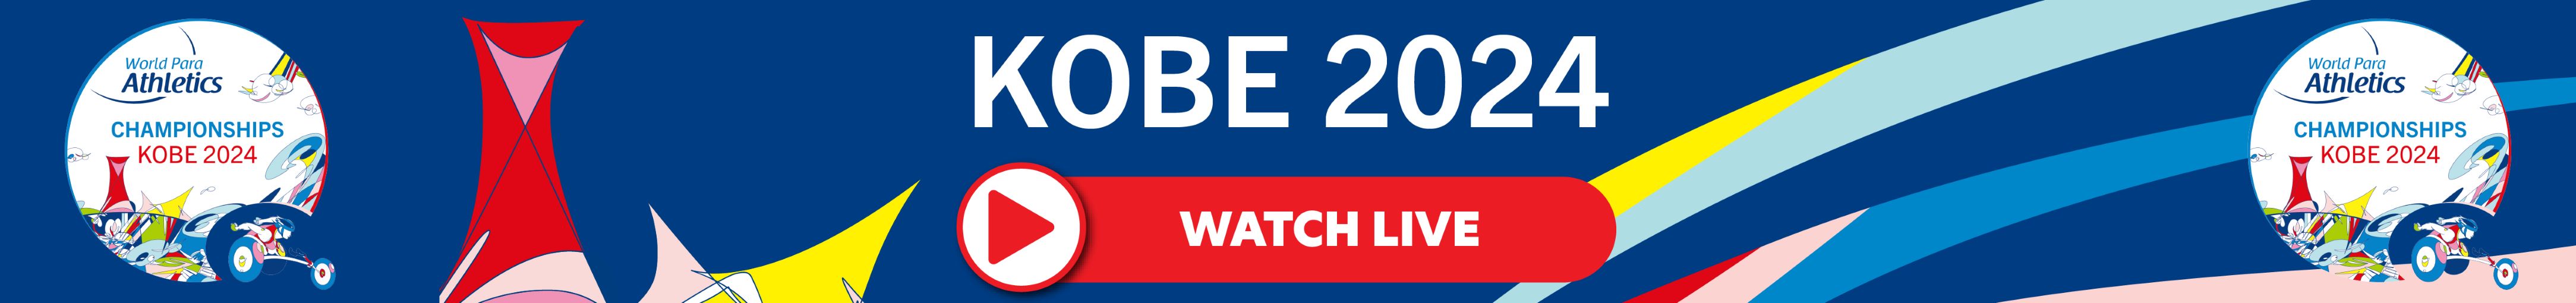 The banner of the Kobe 2024 Para Athletics World Championships Live Streaming